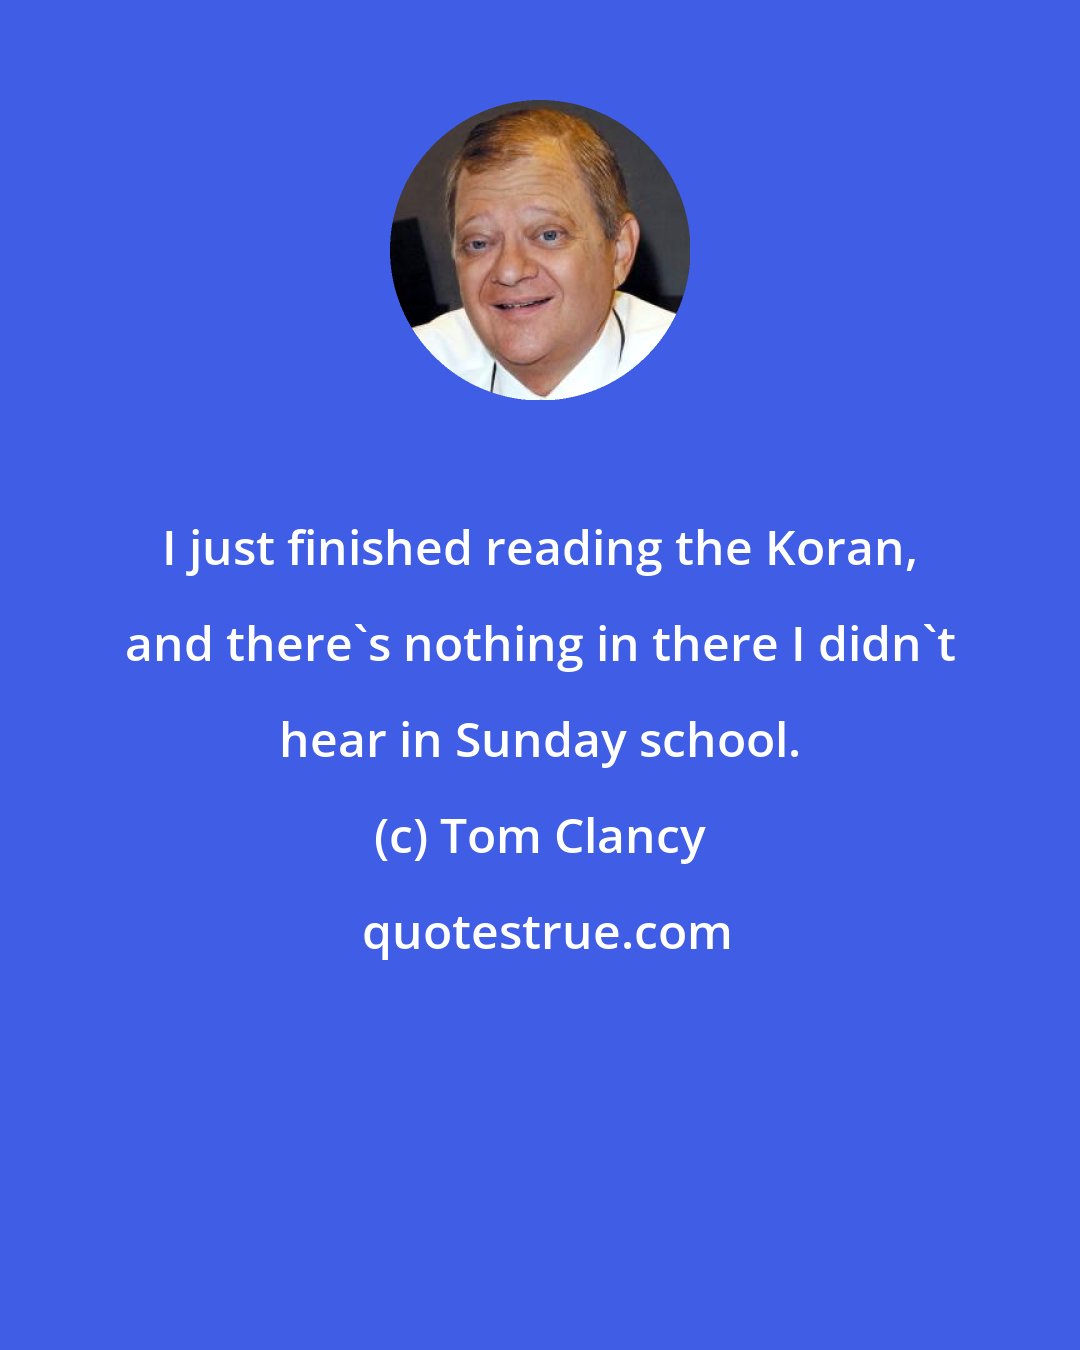 Tom Clancy: I just finished reading the Koran, and there's nothing in there I didn't hear in Sunday school.